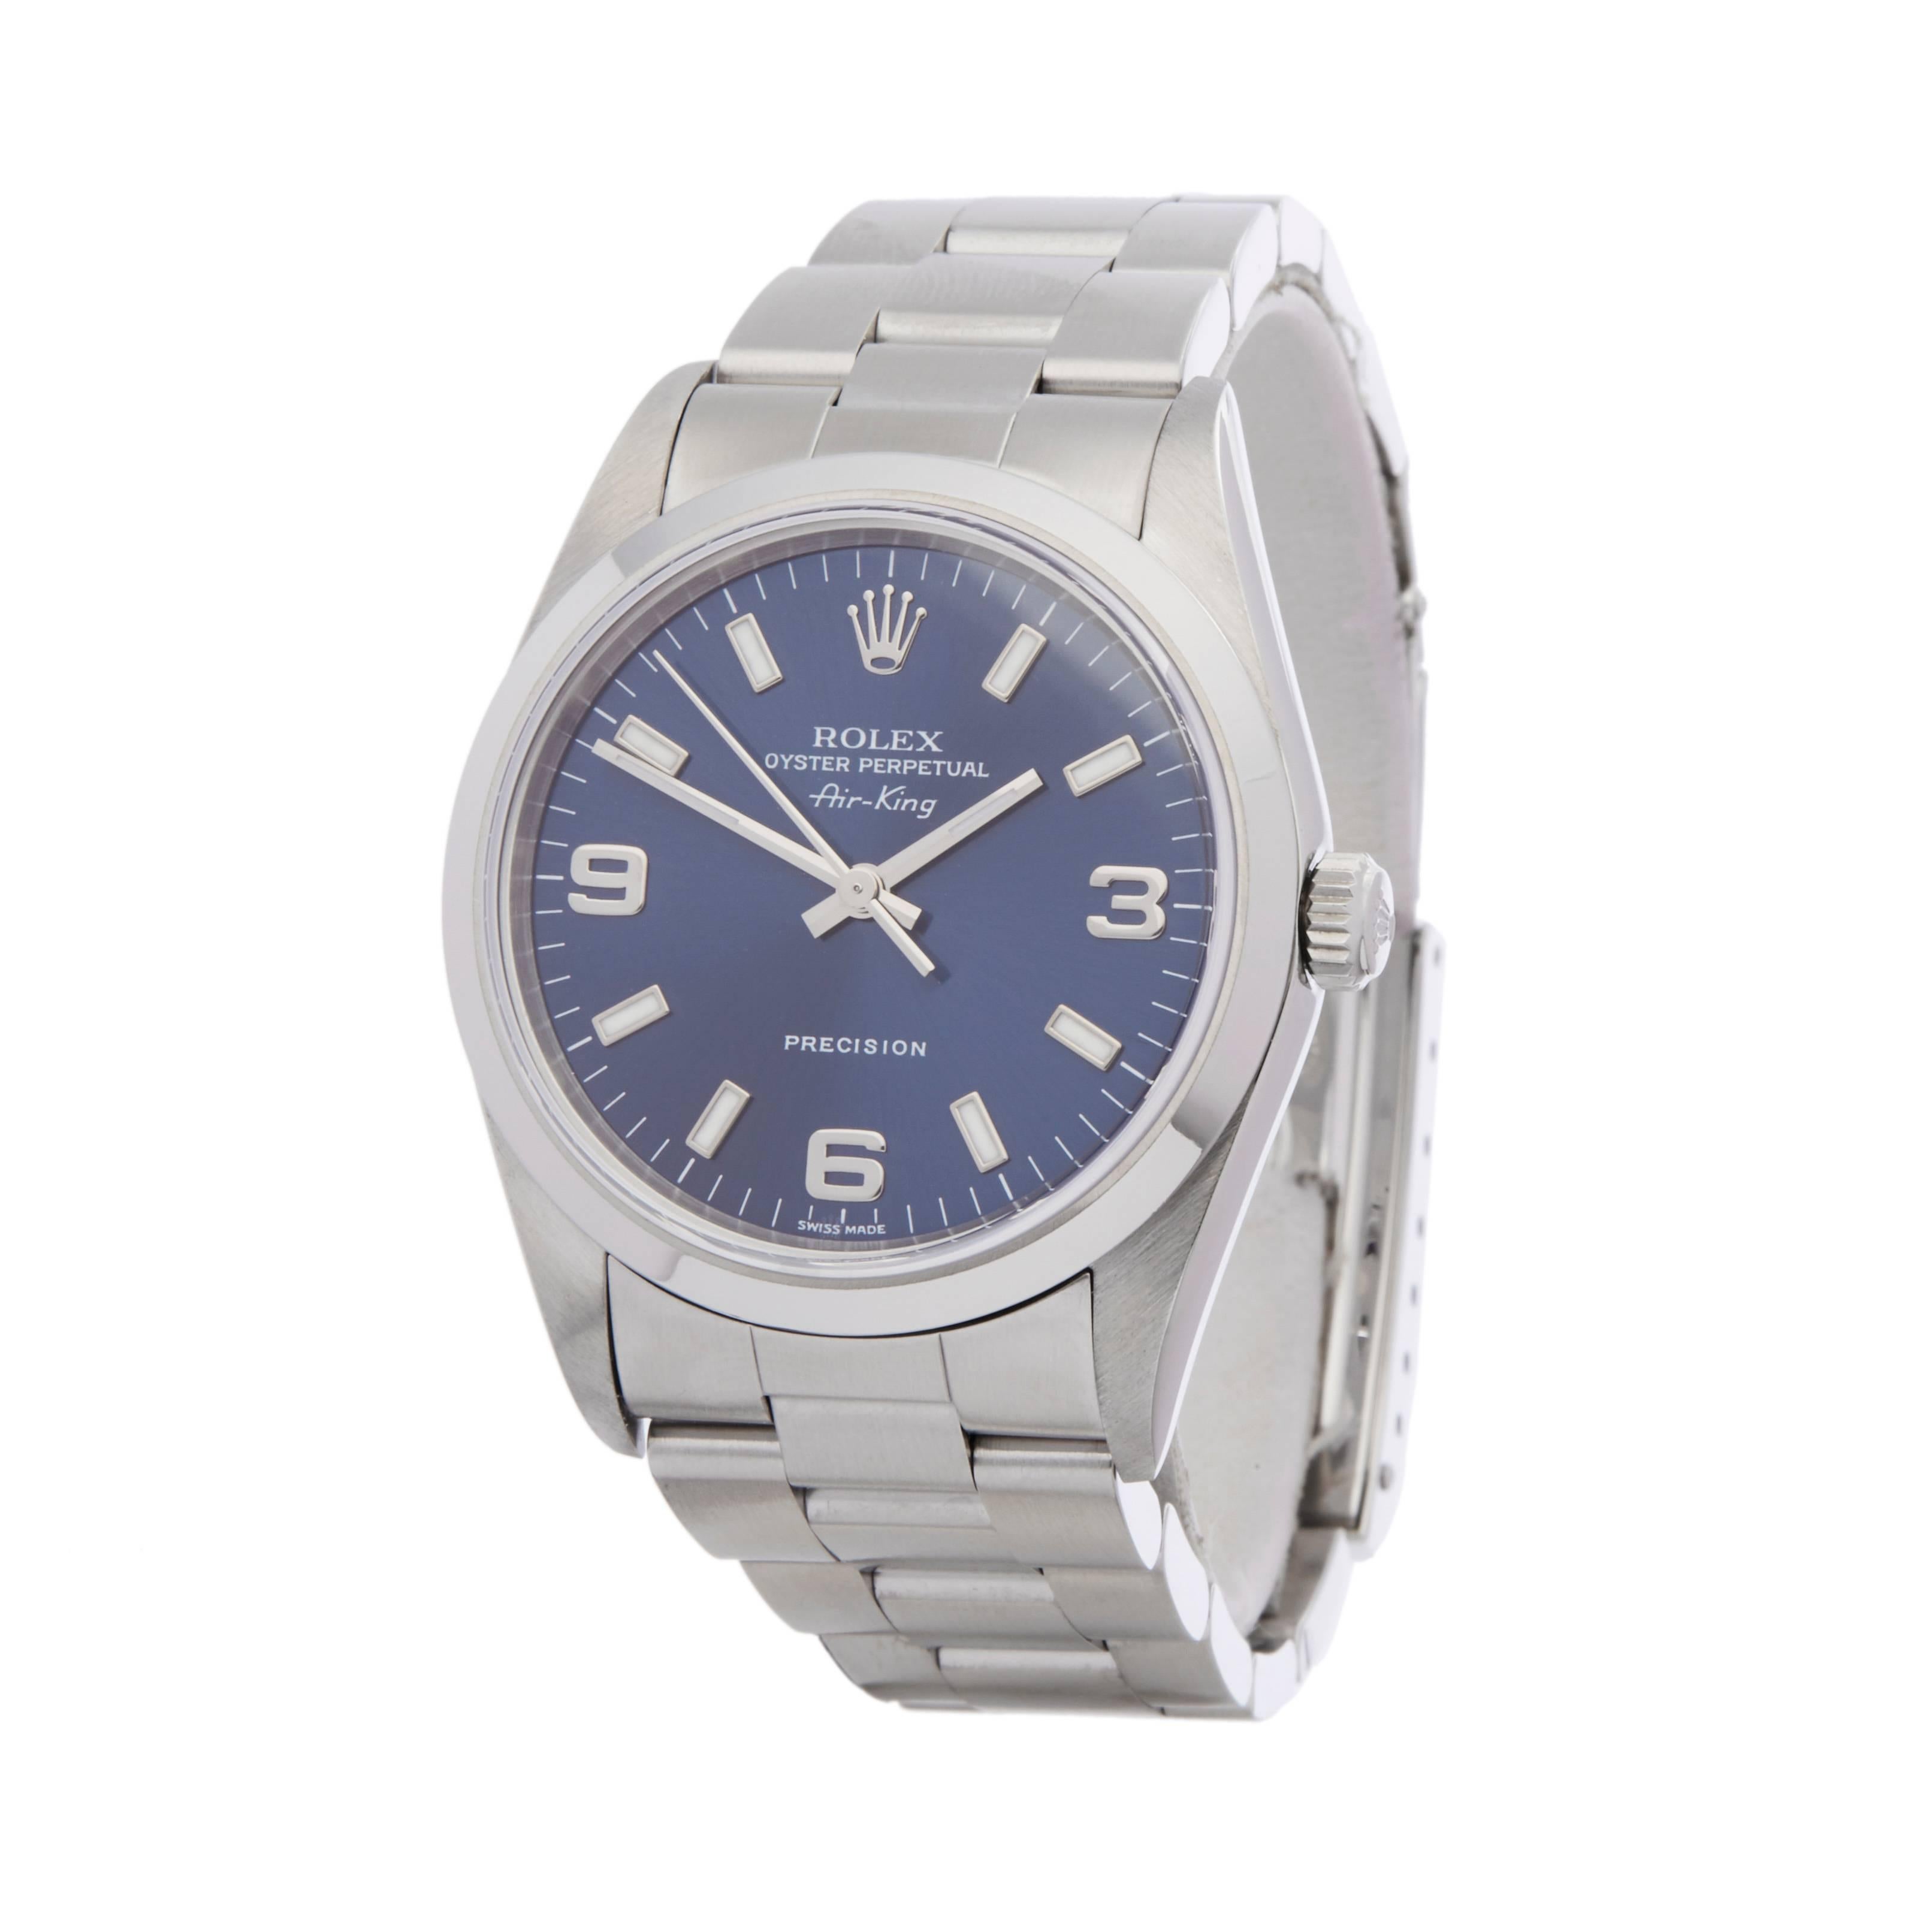 Ref: W4940
Manufacturer: Rolex
Model: Air King
Model Ref: 14000M
Age: 7th June 2002
Gender: Unisex
Complete With: Box & Guarantee
Dial: Blue Arabic
Glass: Sapphire Crystal
Movement: Automatic
Water Resistance: To Manufacturers Specifications
Case: